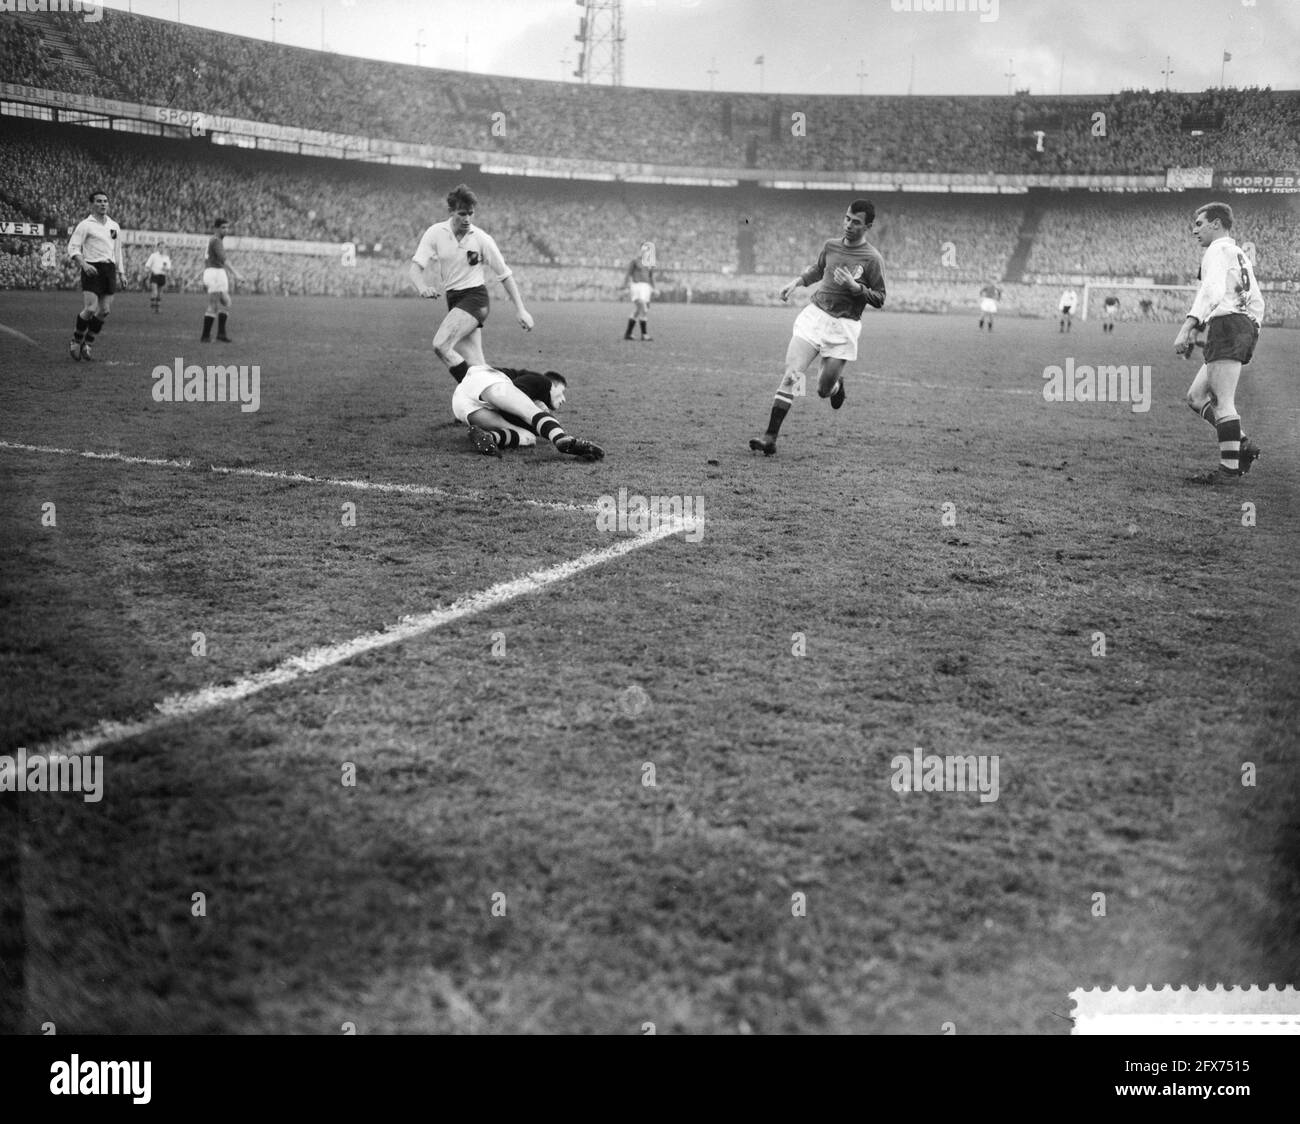 Coen Moulijn in action (2nd from right), January 3, 1960, sports, soccer, The Netherlands, 20th century press agency photo, news to remember, documentary, historic photography 1945-1990, visual stories, human history of the Twentieth Century, capturing moments in time Stock Photo